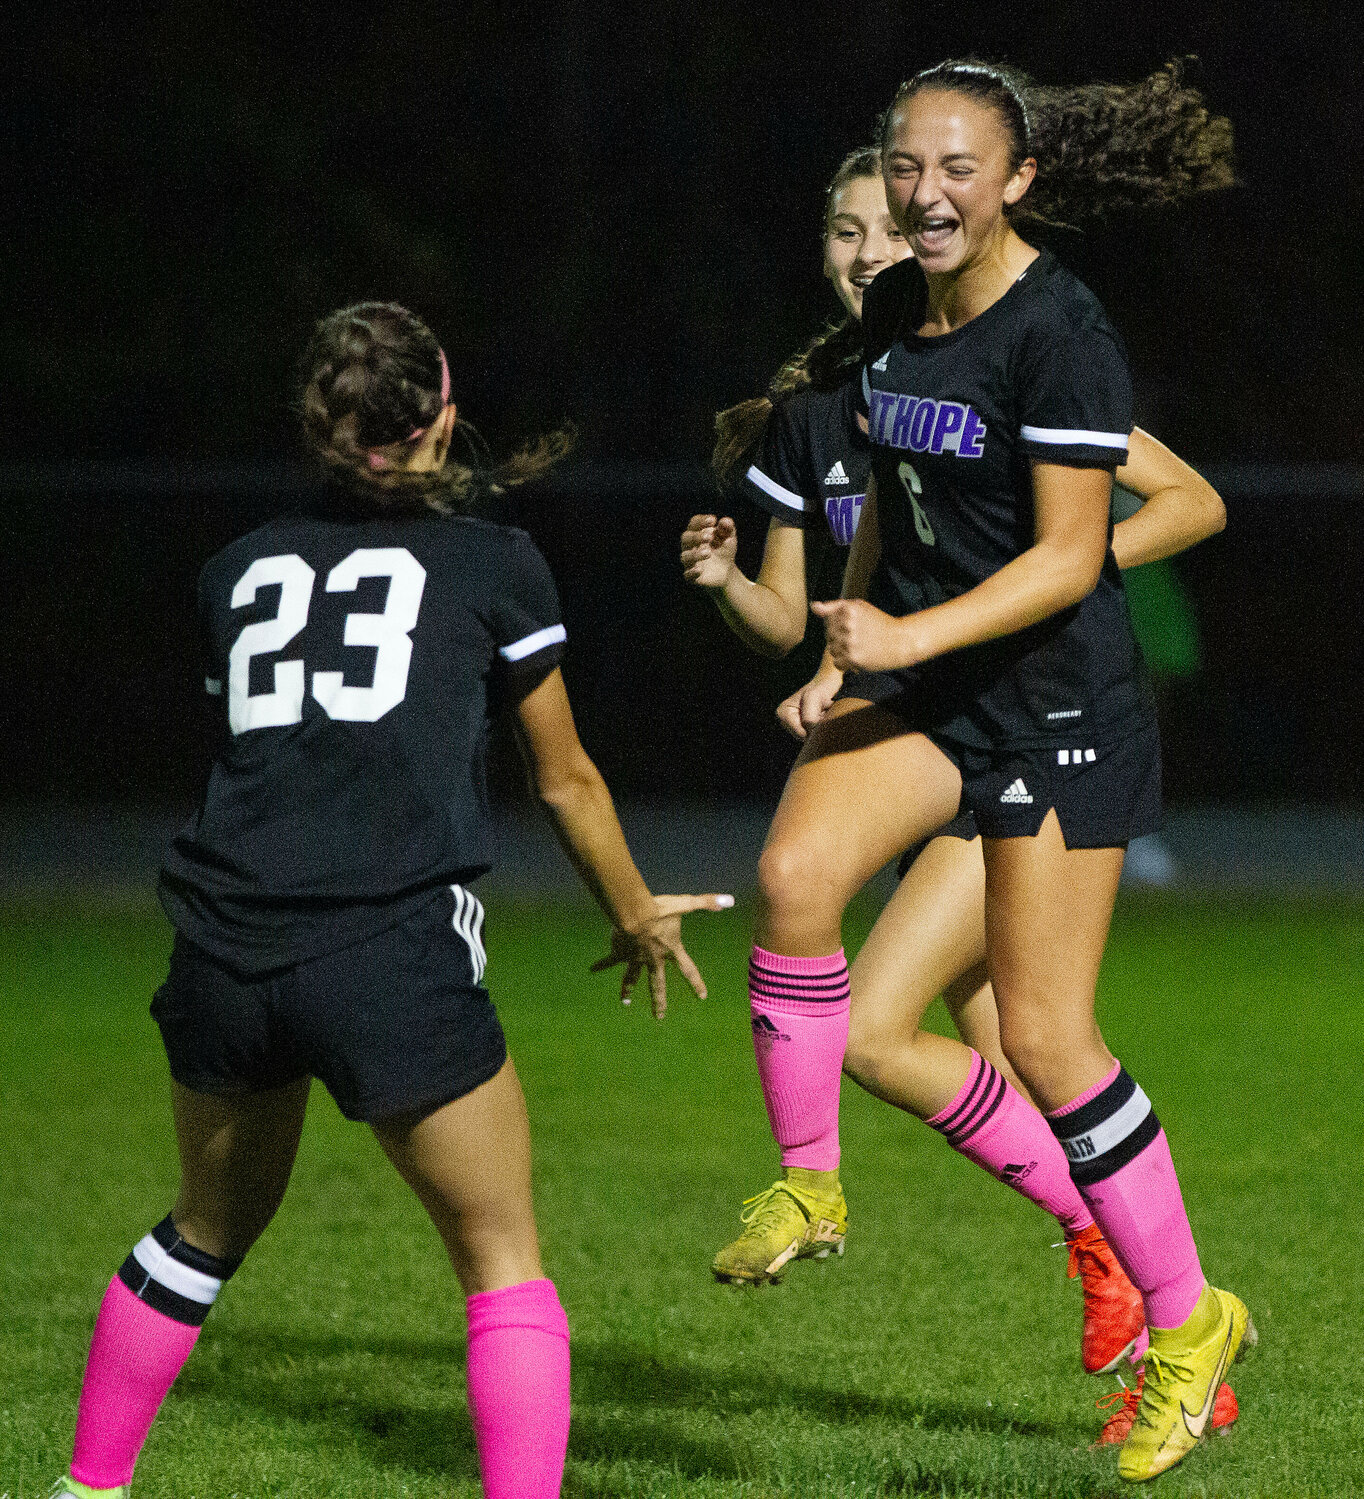 Hannah Rezendes (left) gets ready to catch an elated Caitlyn Terceiro (right) after she scored during the Huskies win over East Greenwich.